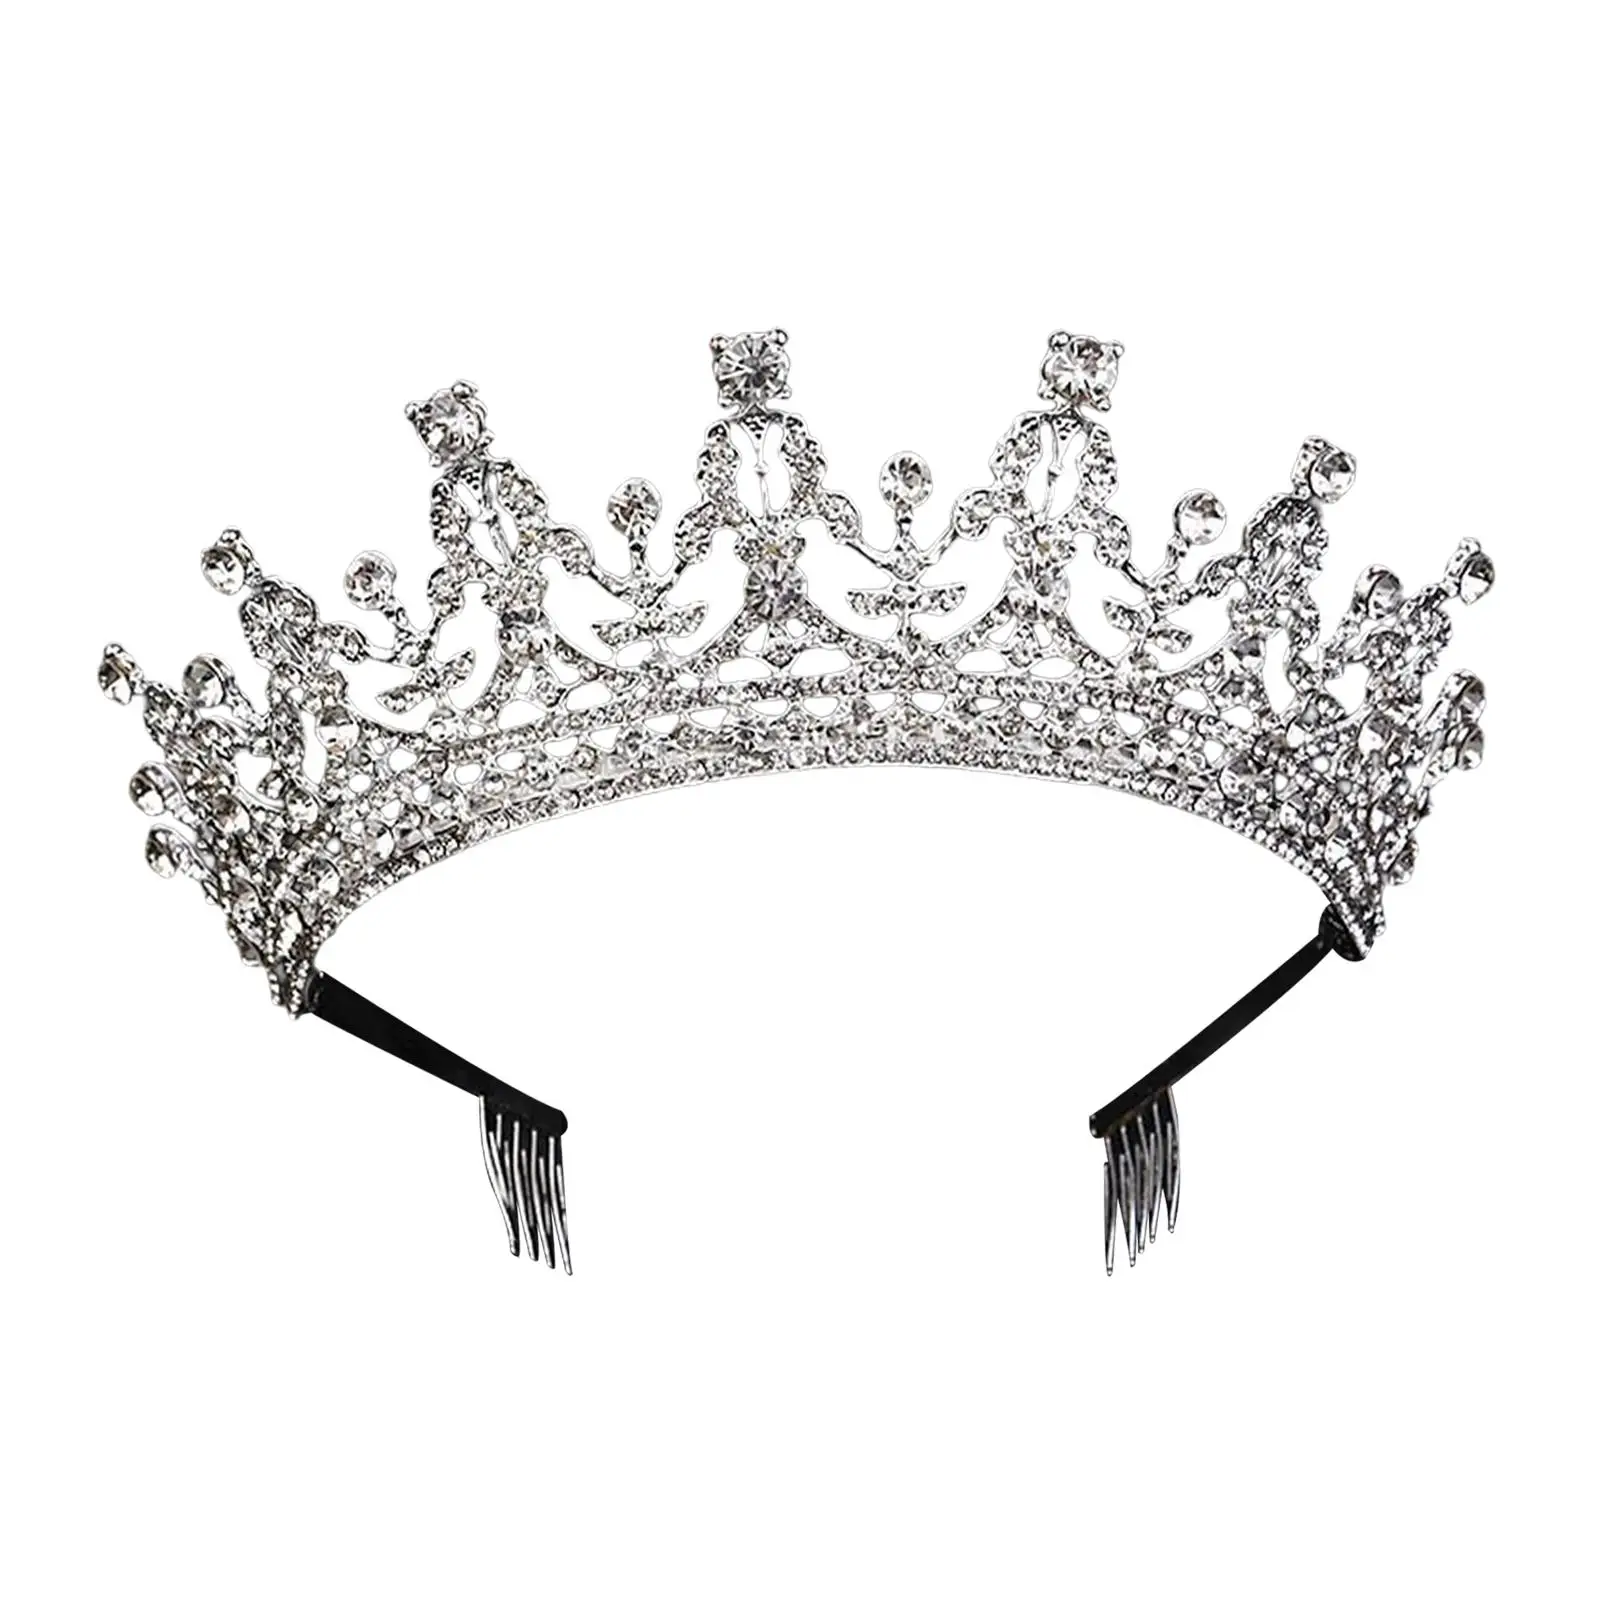 Crown Hair Accessories Gift Princess Tiara Bride Quinceanera Headpieces for Women for Party Birthday Pageant Halloween Prom